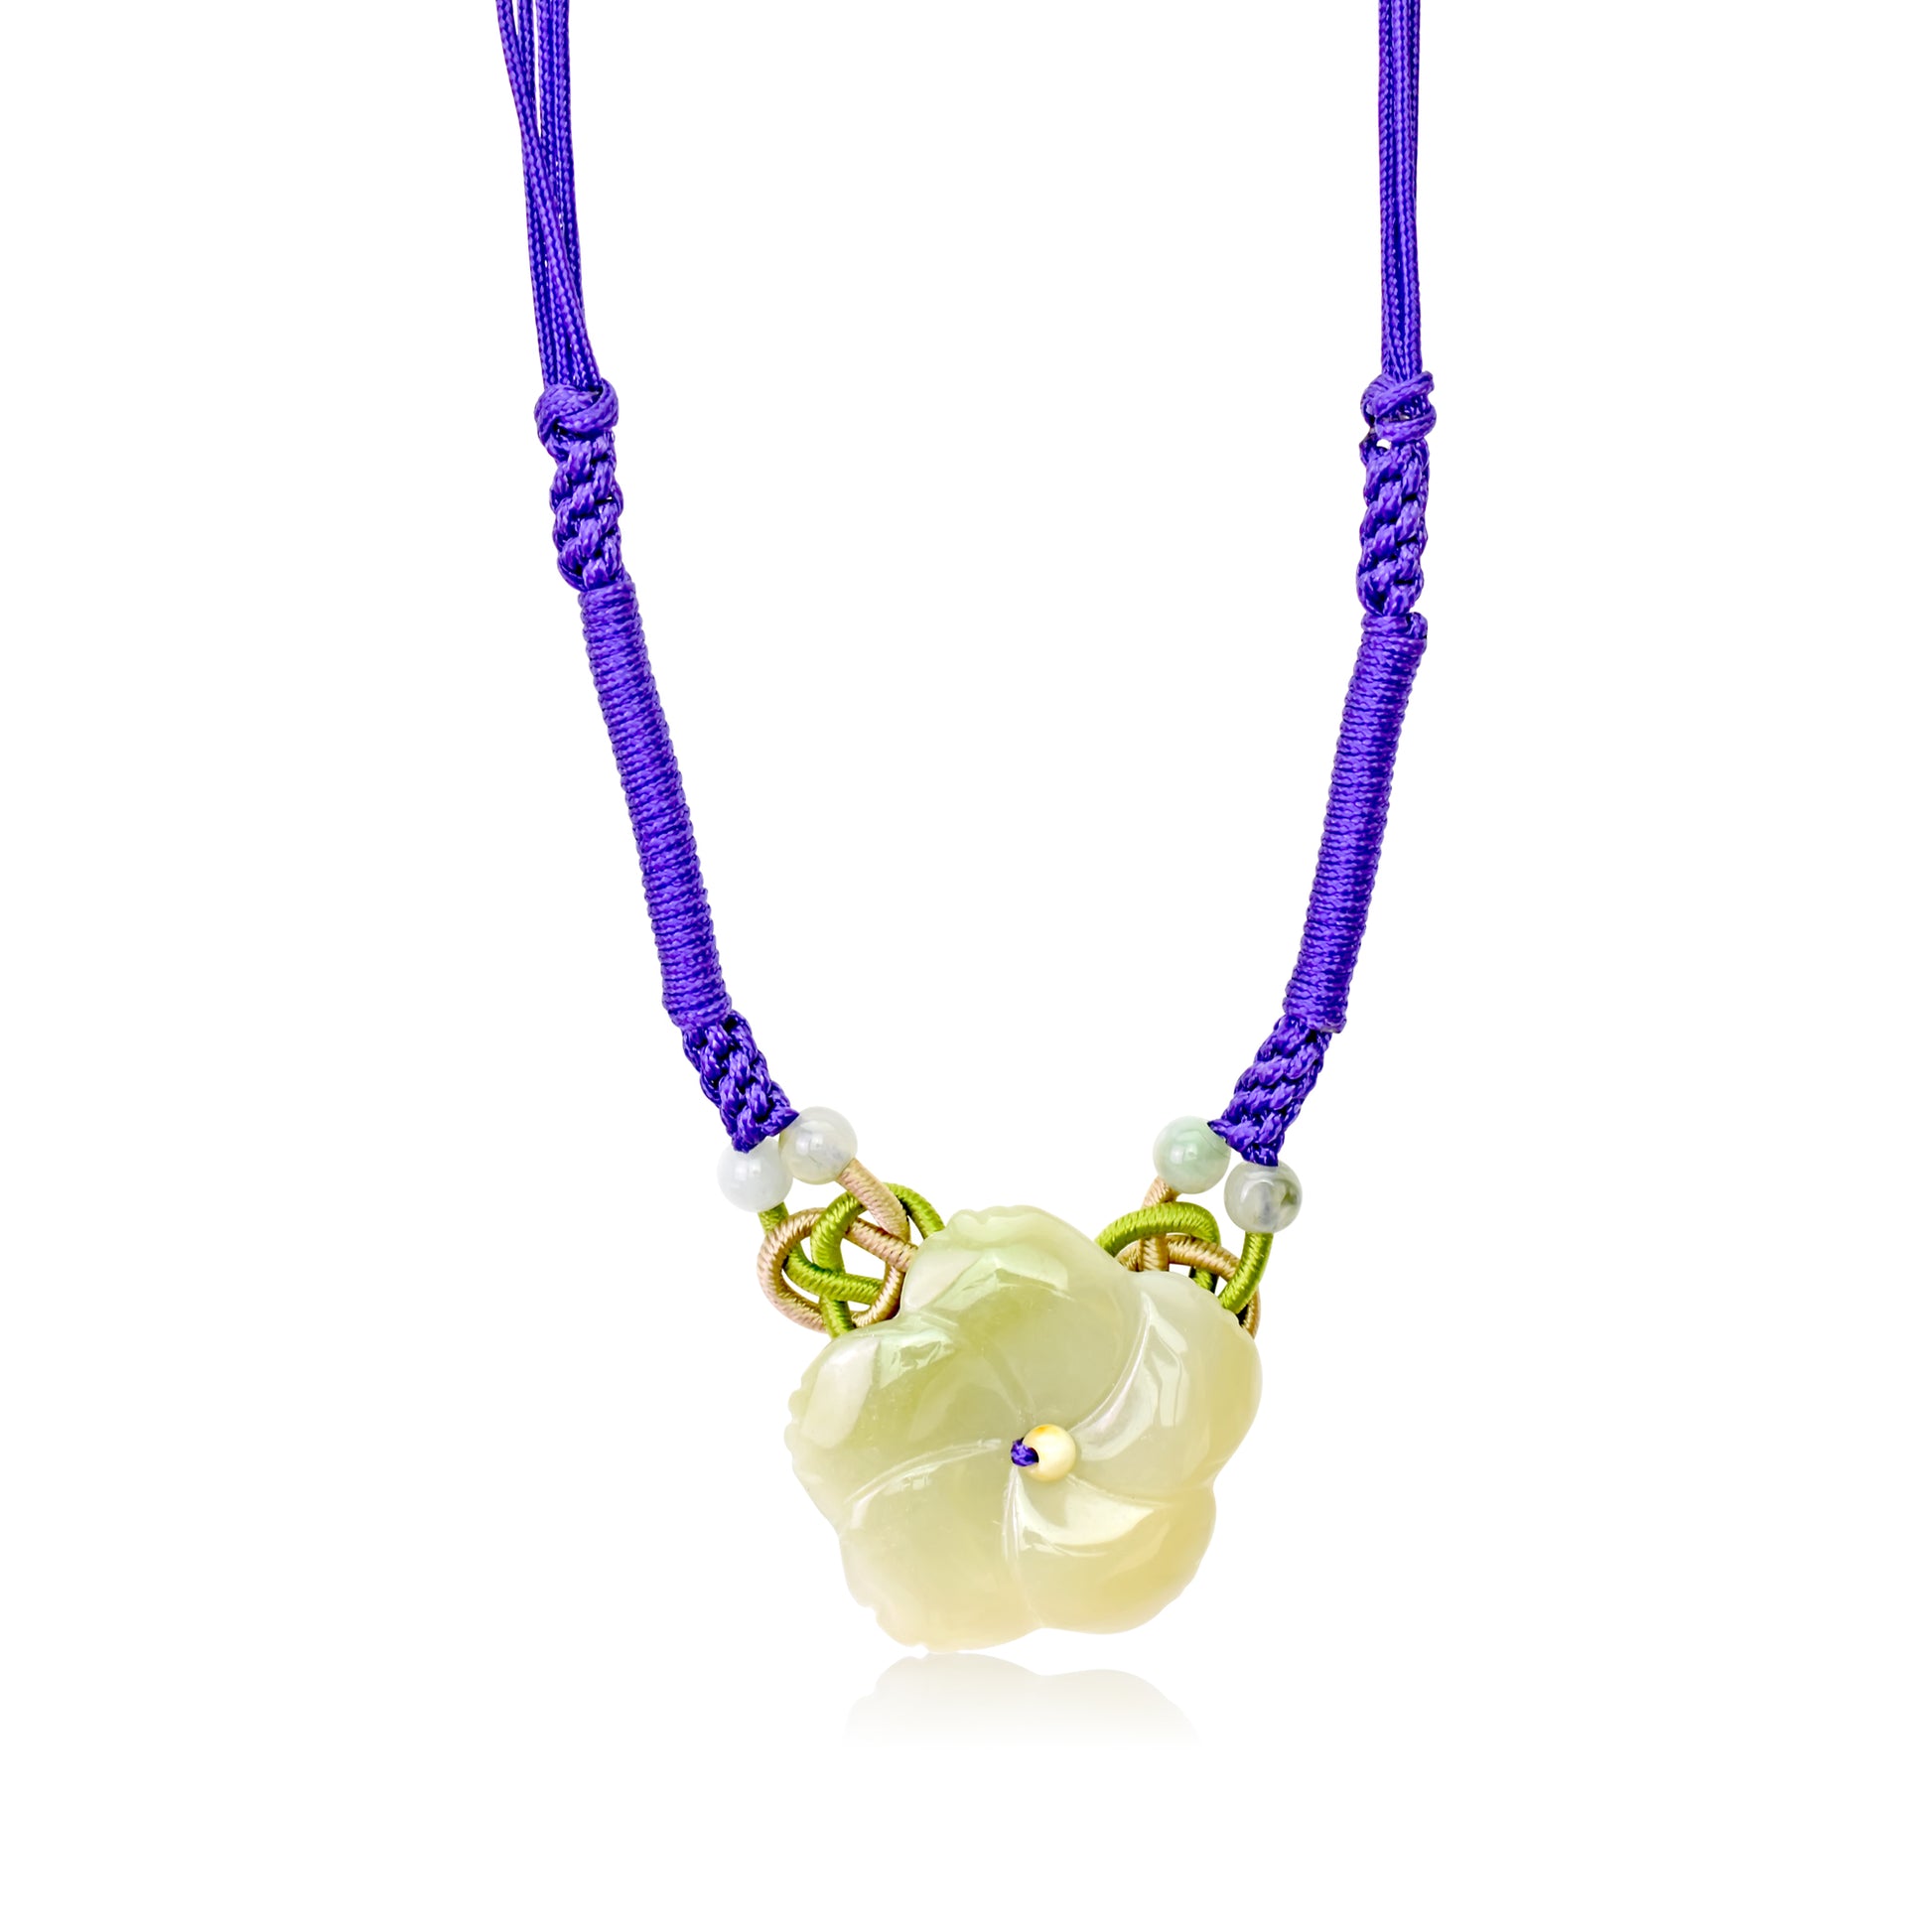 Get the Look You Crave with the Clematis Blossom Jade Necklace with Purple Cord